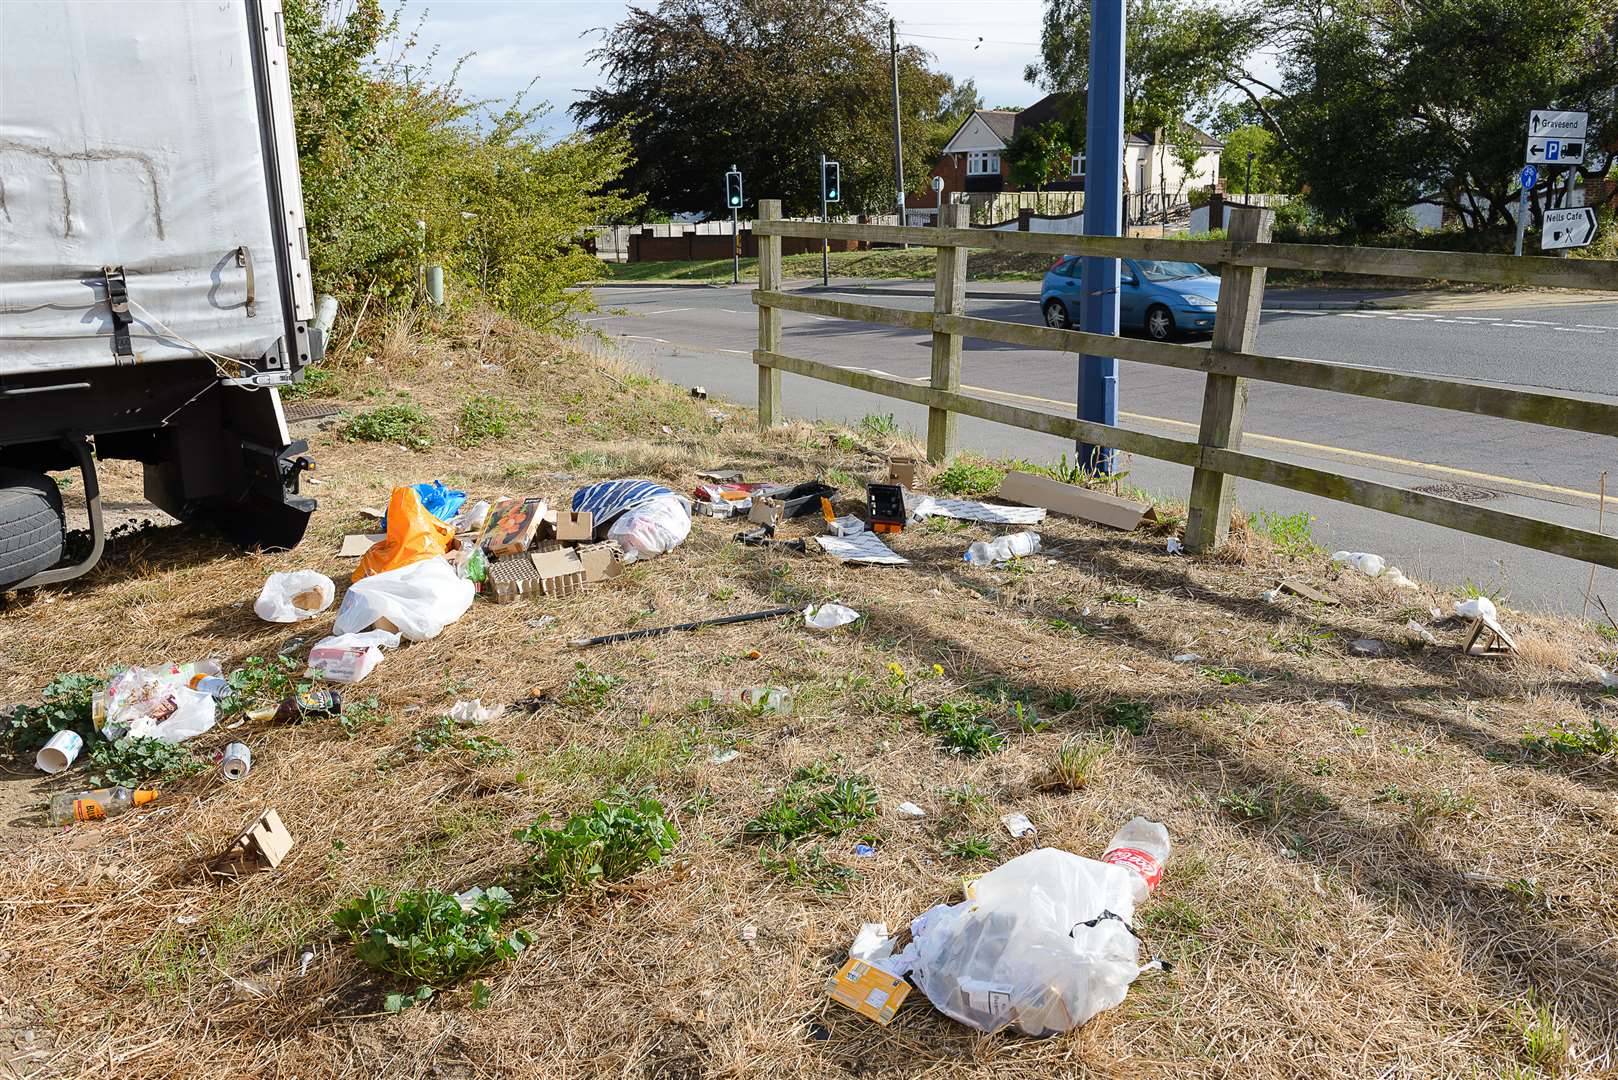 View of rubbish discarded at lorry park opposite Nell's Cafe